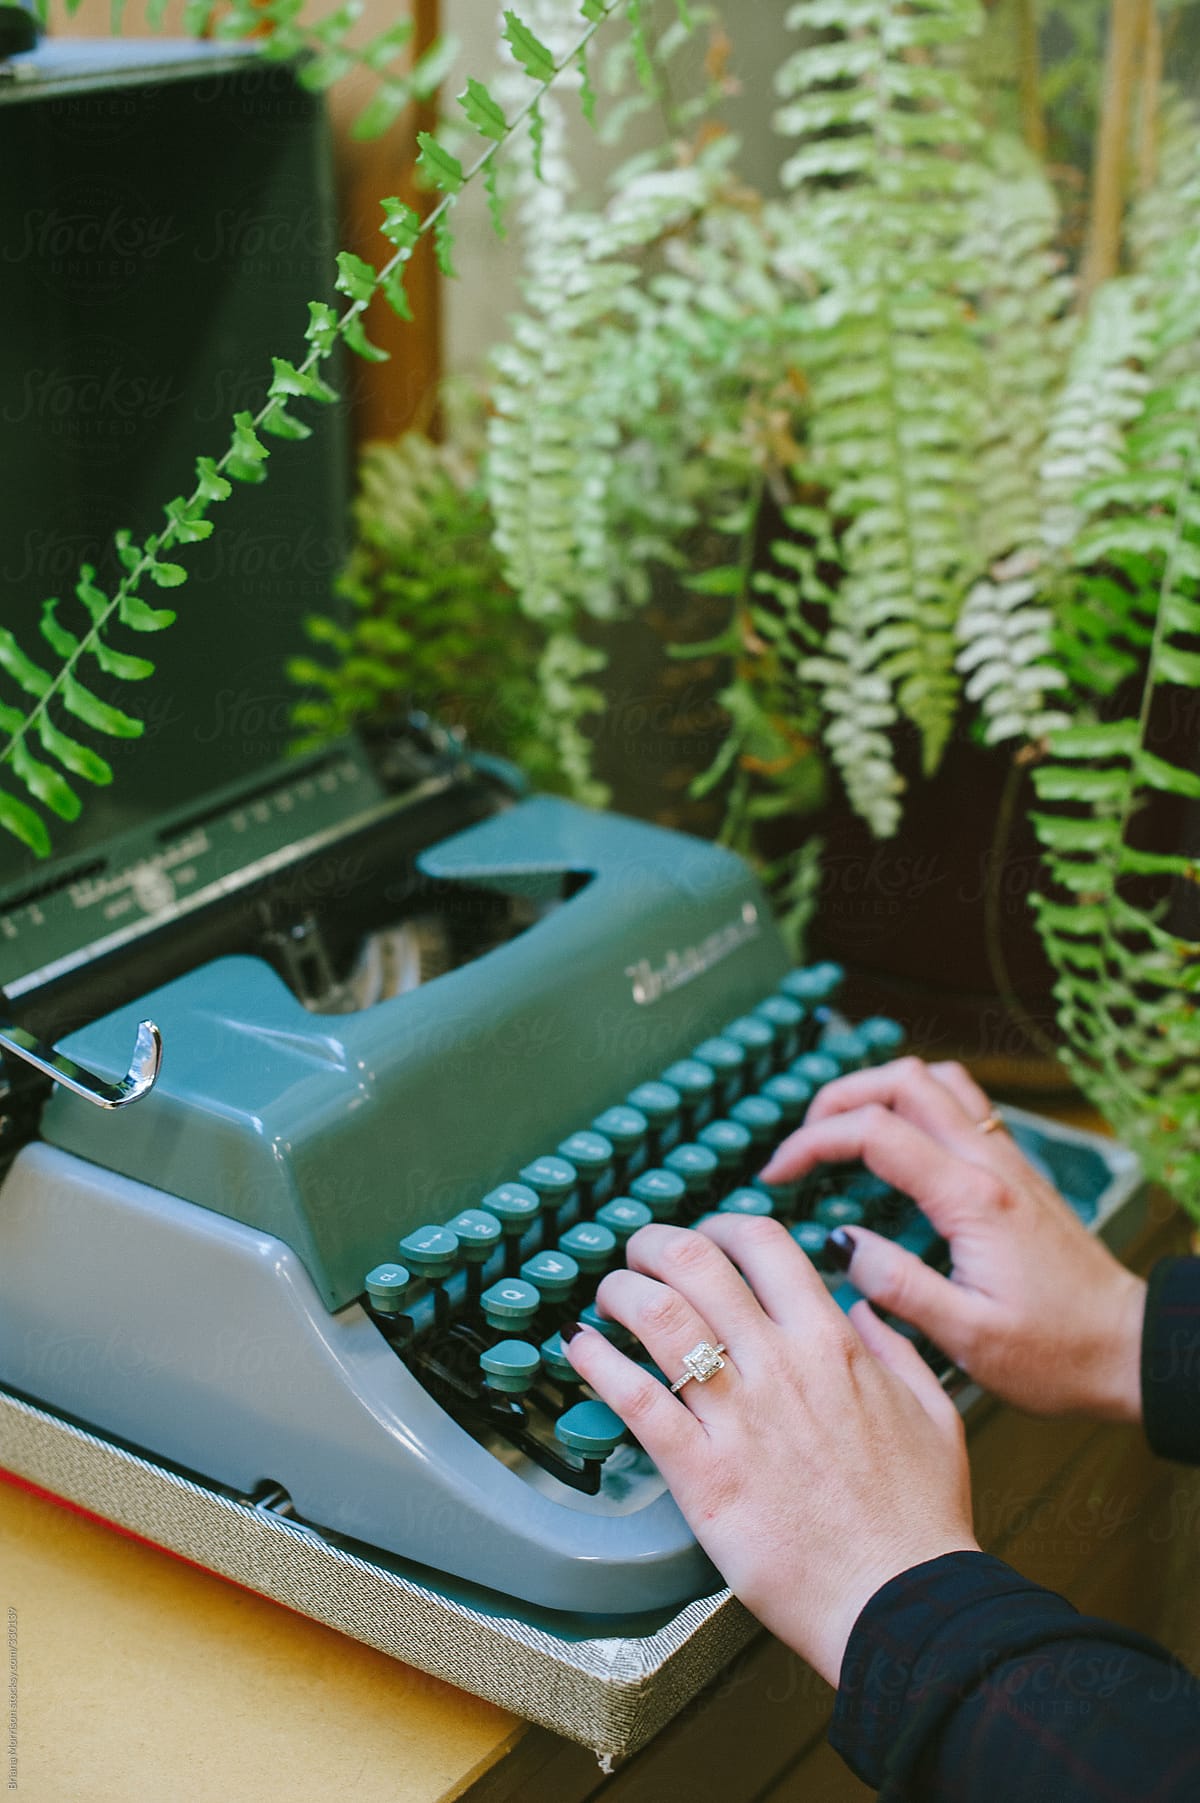 Hands at a Green Typewriter with Indoor Fern in the Background